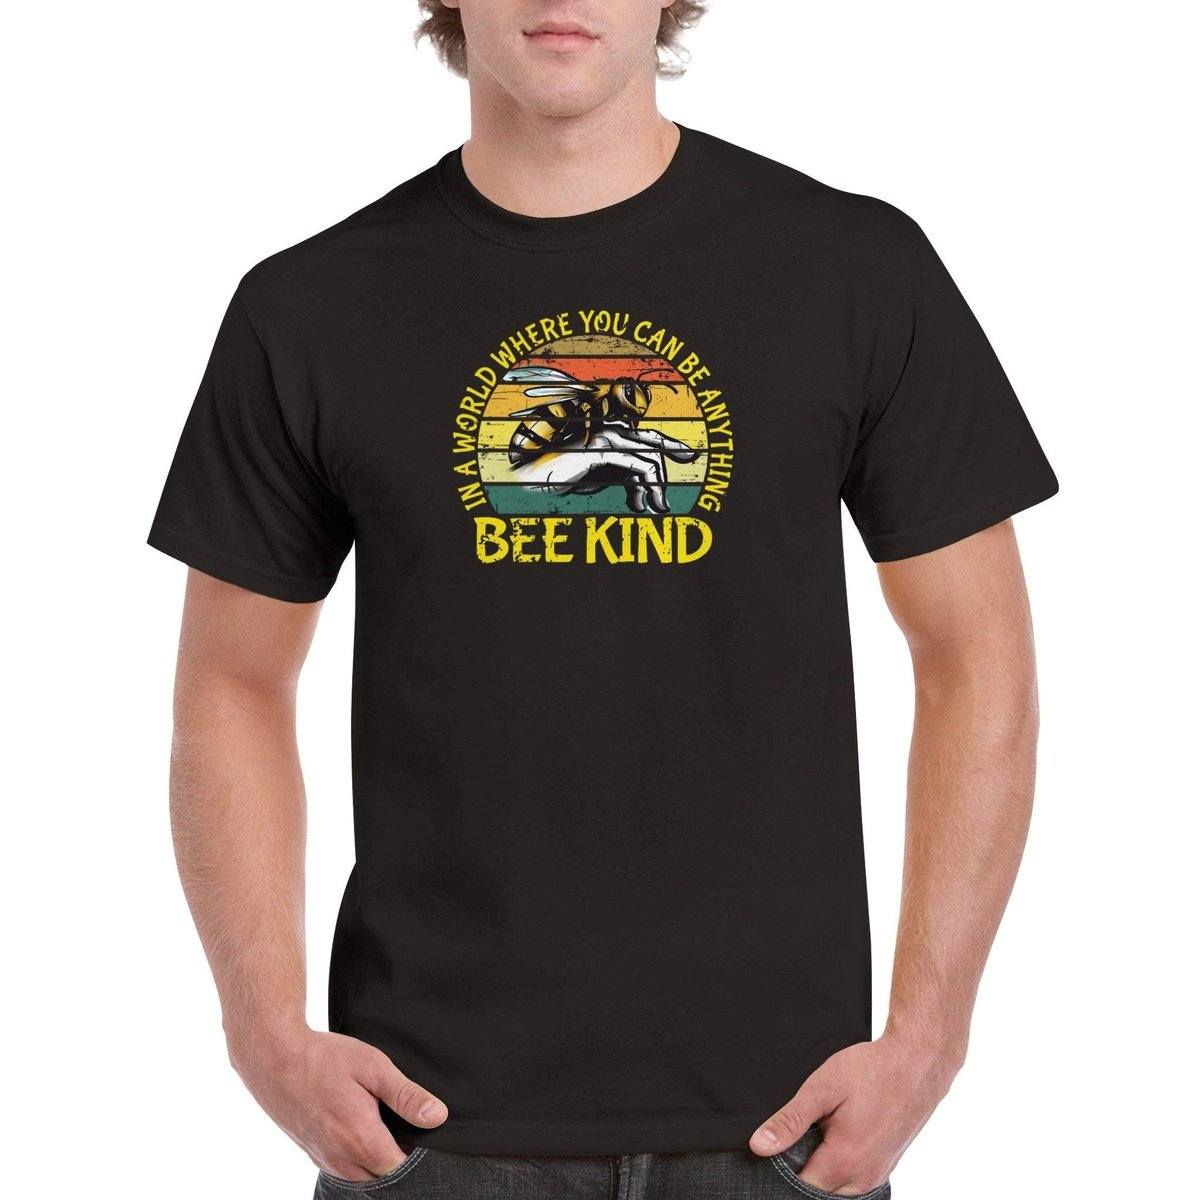 In a world where you can be anything bee kind Tshirt - Retro Vintage Bee - Unisex Crewneck T-shirt Australia Online Color Black / S